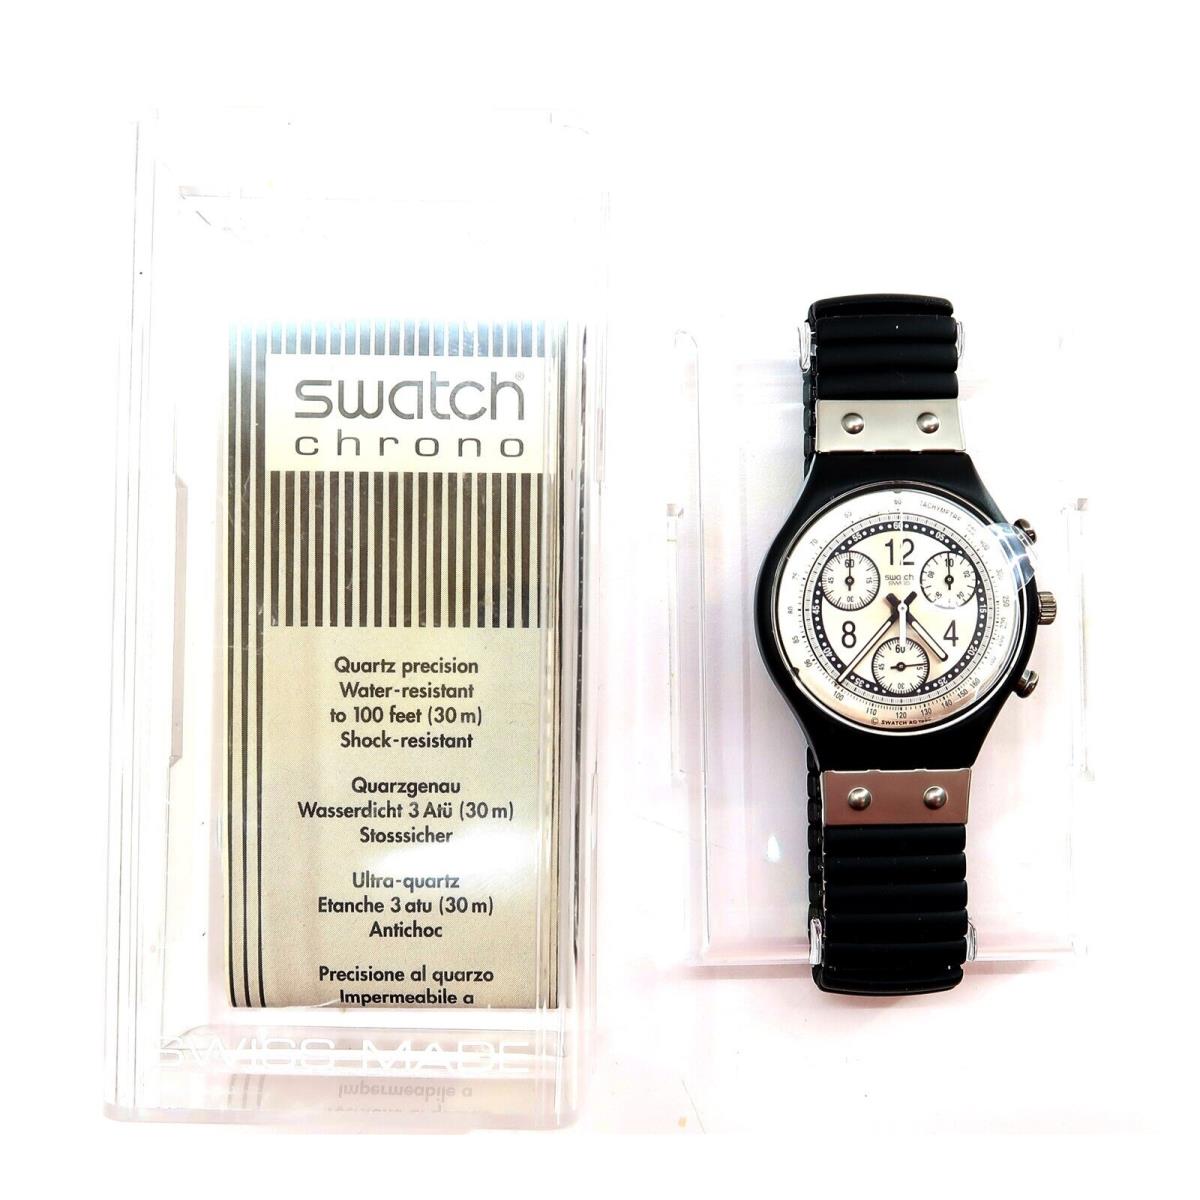 Swatch Chrono Watch Metal Edge SCB119 with Case and Papers 1997 Gents Nos - Dial: Silver, Band: Black, Bezel: Clear